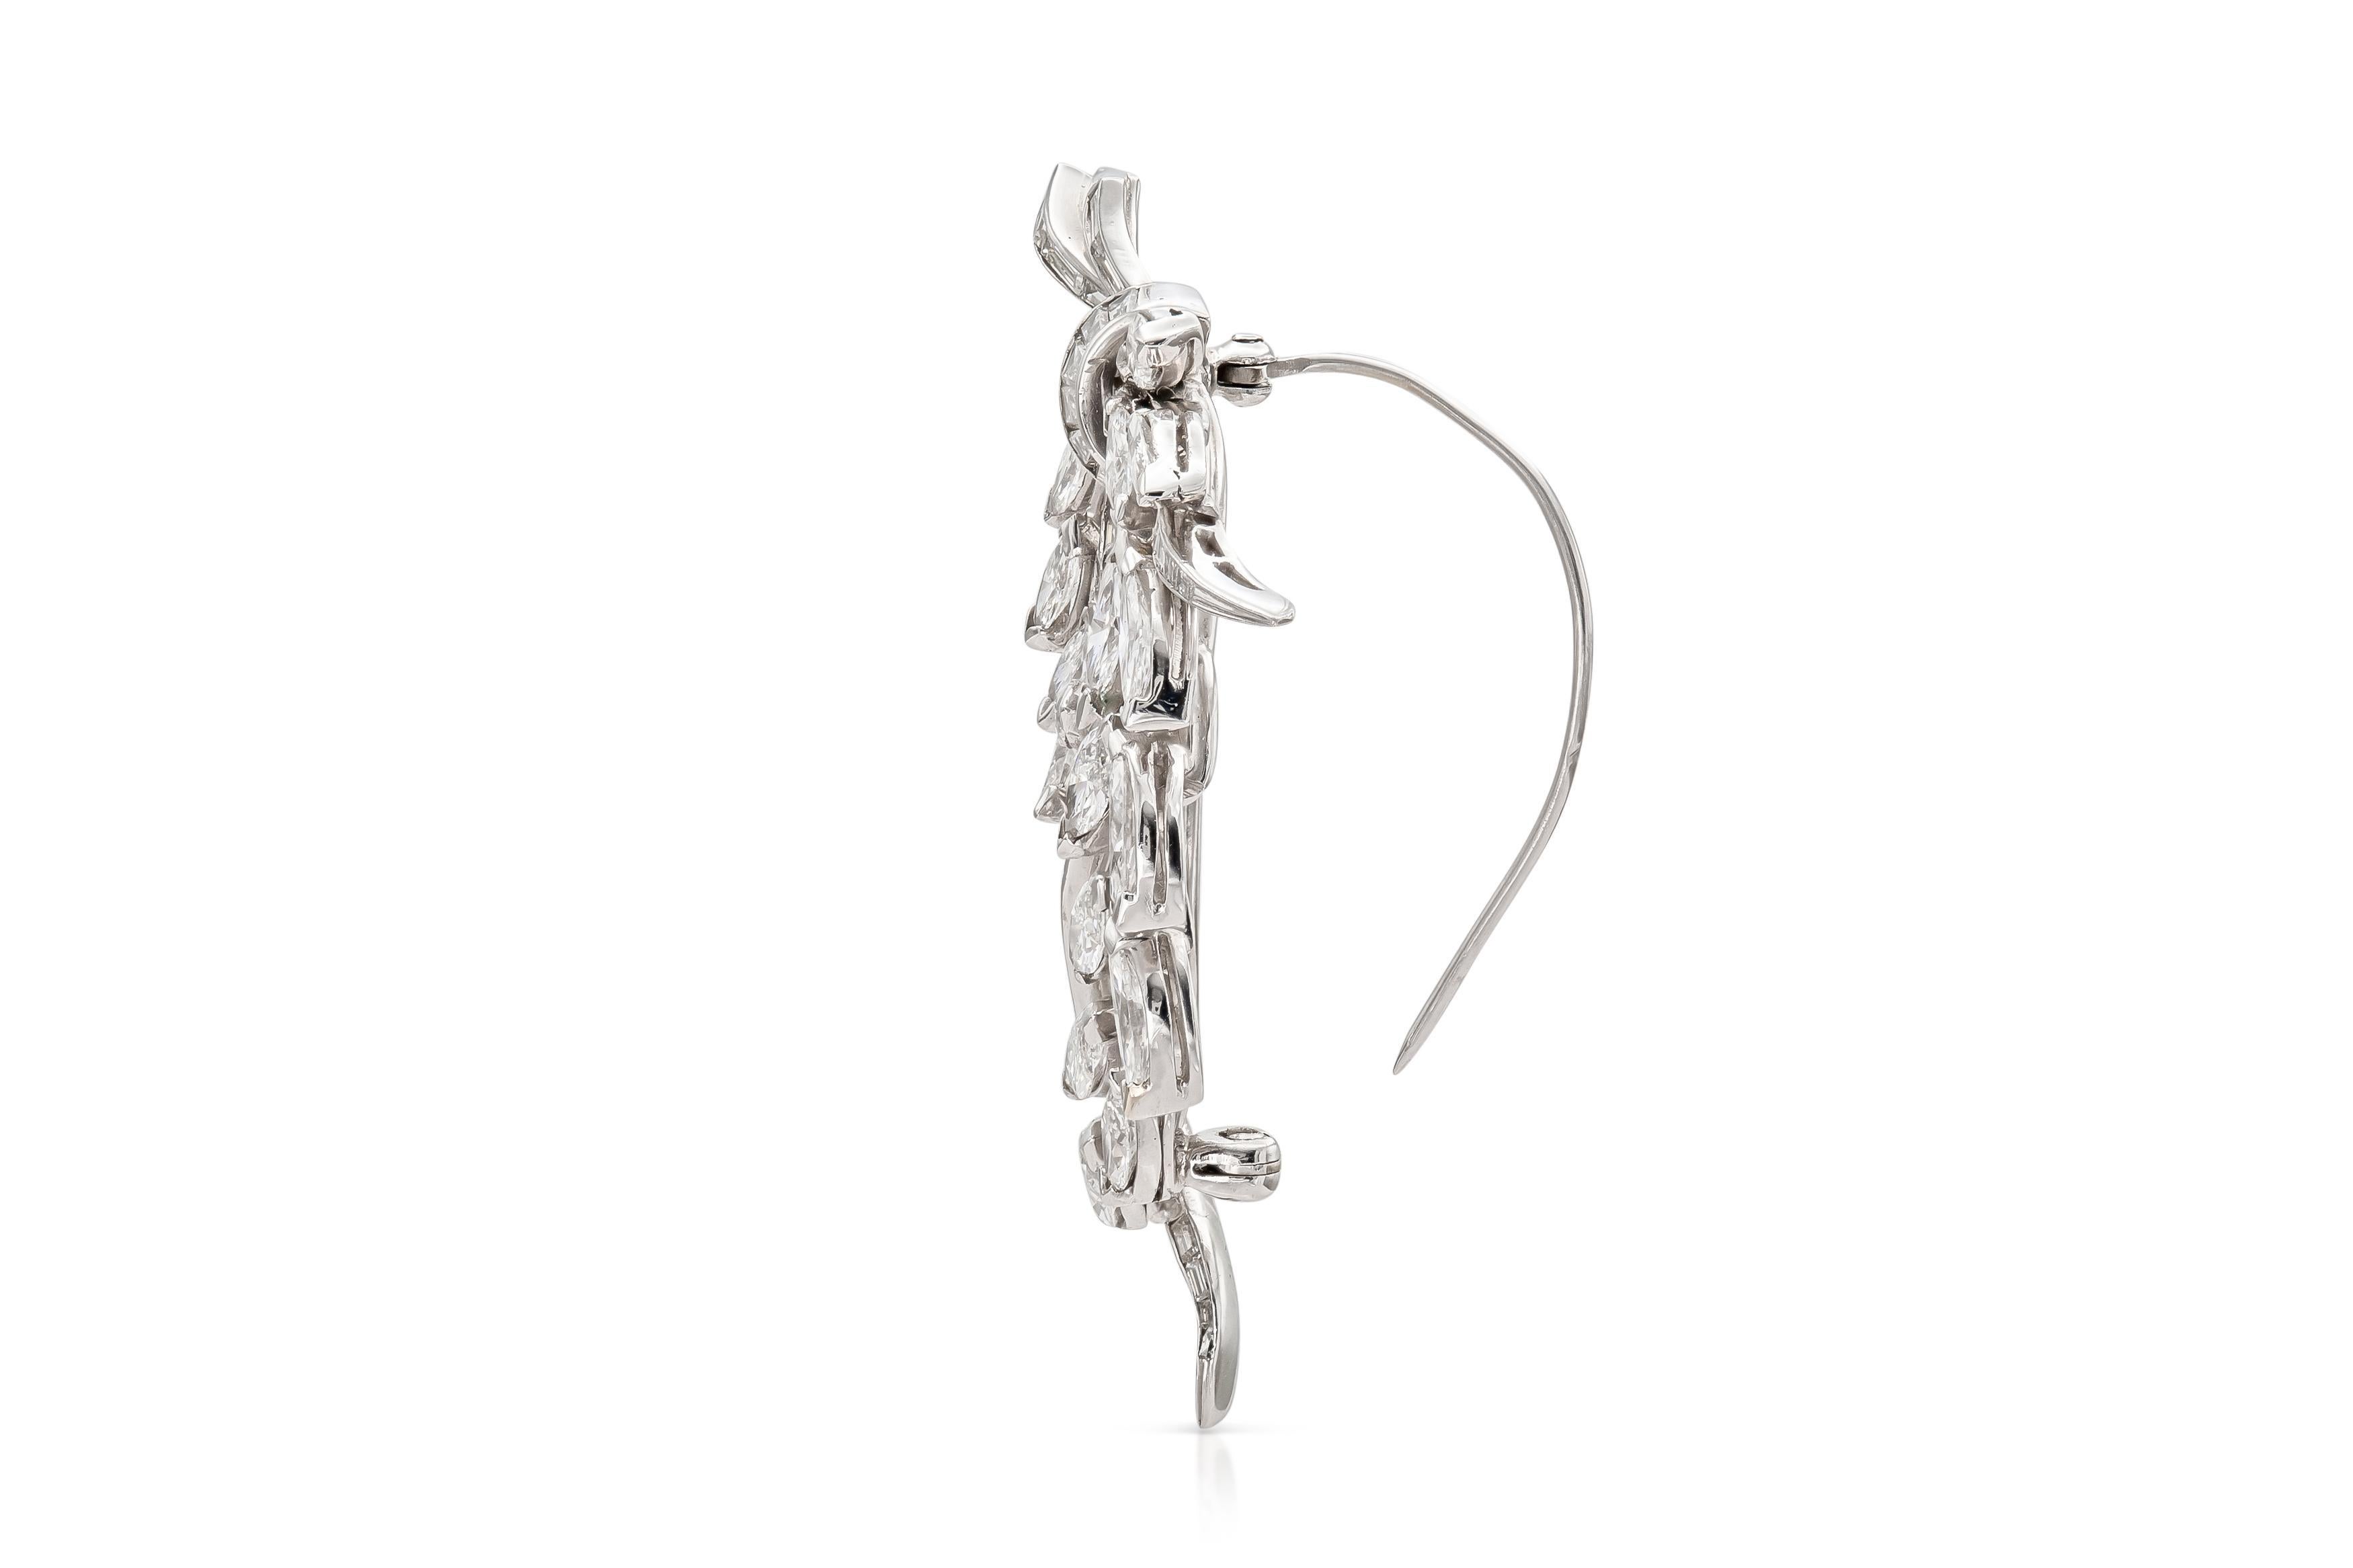 Finely crafted in platinum with Marquise and Baguette cut Diamonds weighing approximately a total of 7.00 carats.
Signed by Kwiat
2 1/4 x 1 1/2 inches